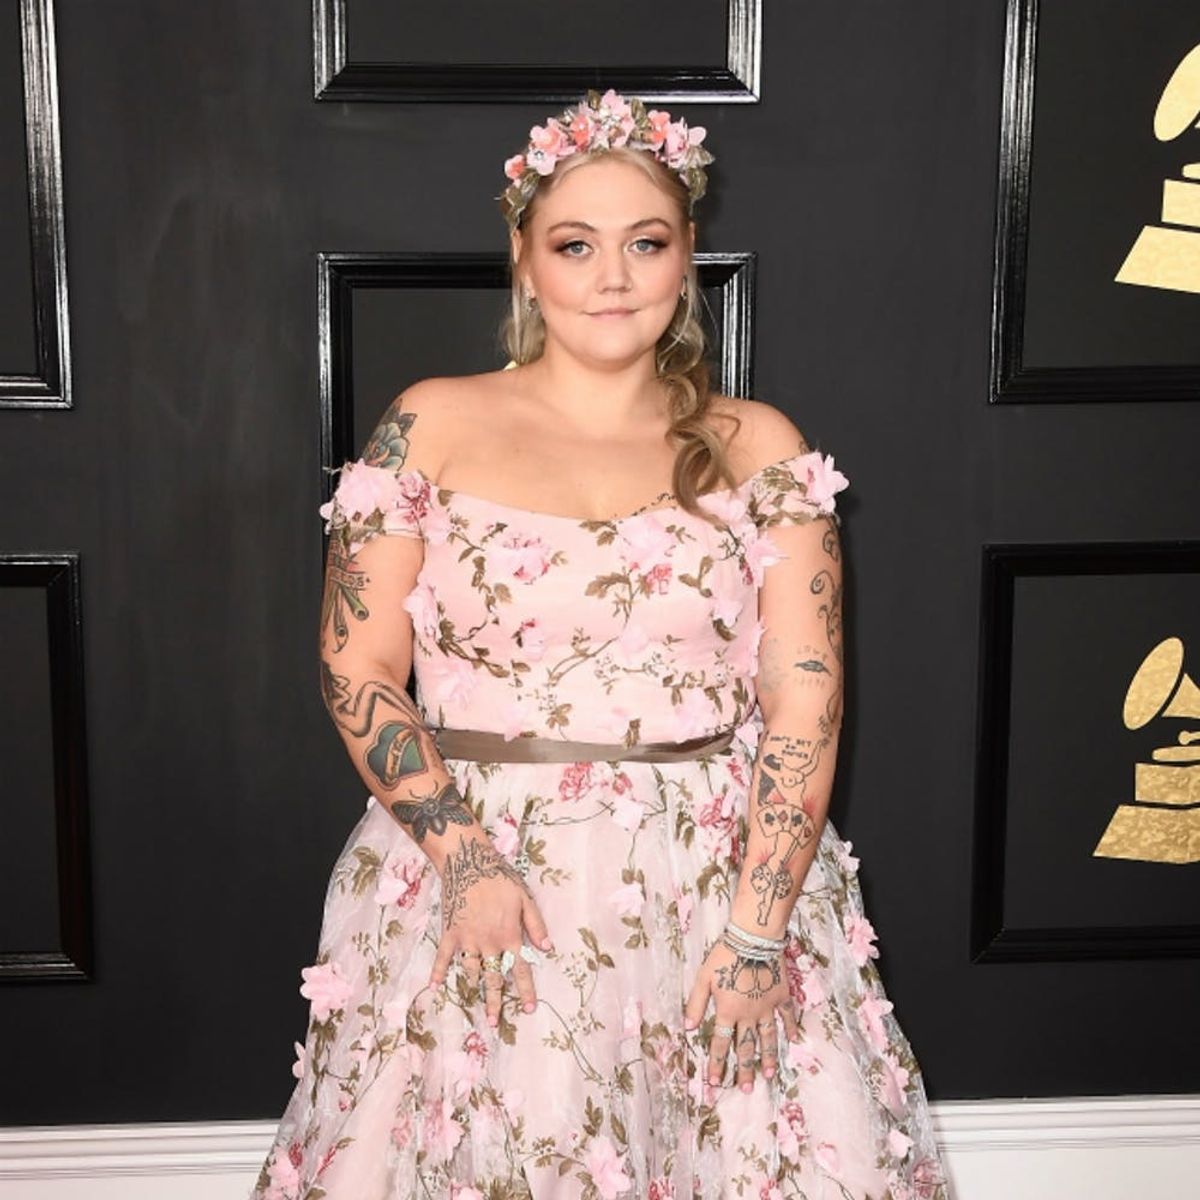 Here’s Why Elle King Pulled a Runaway Bride on Her Wedding Day